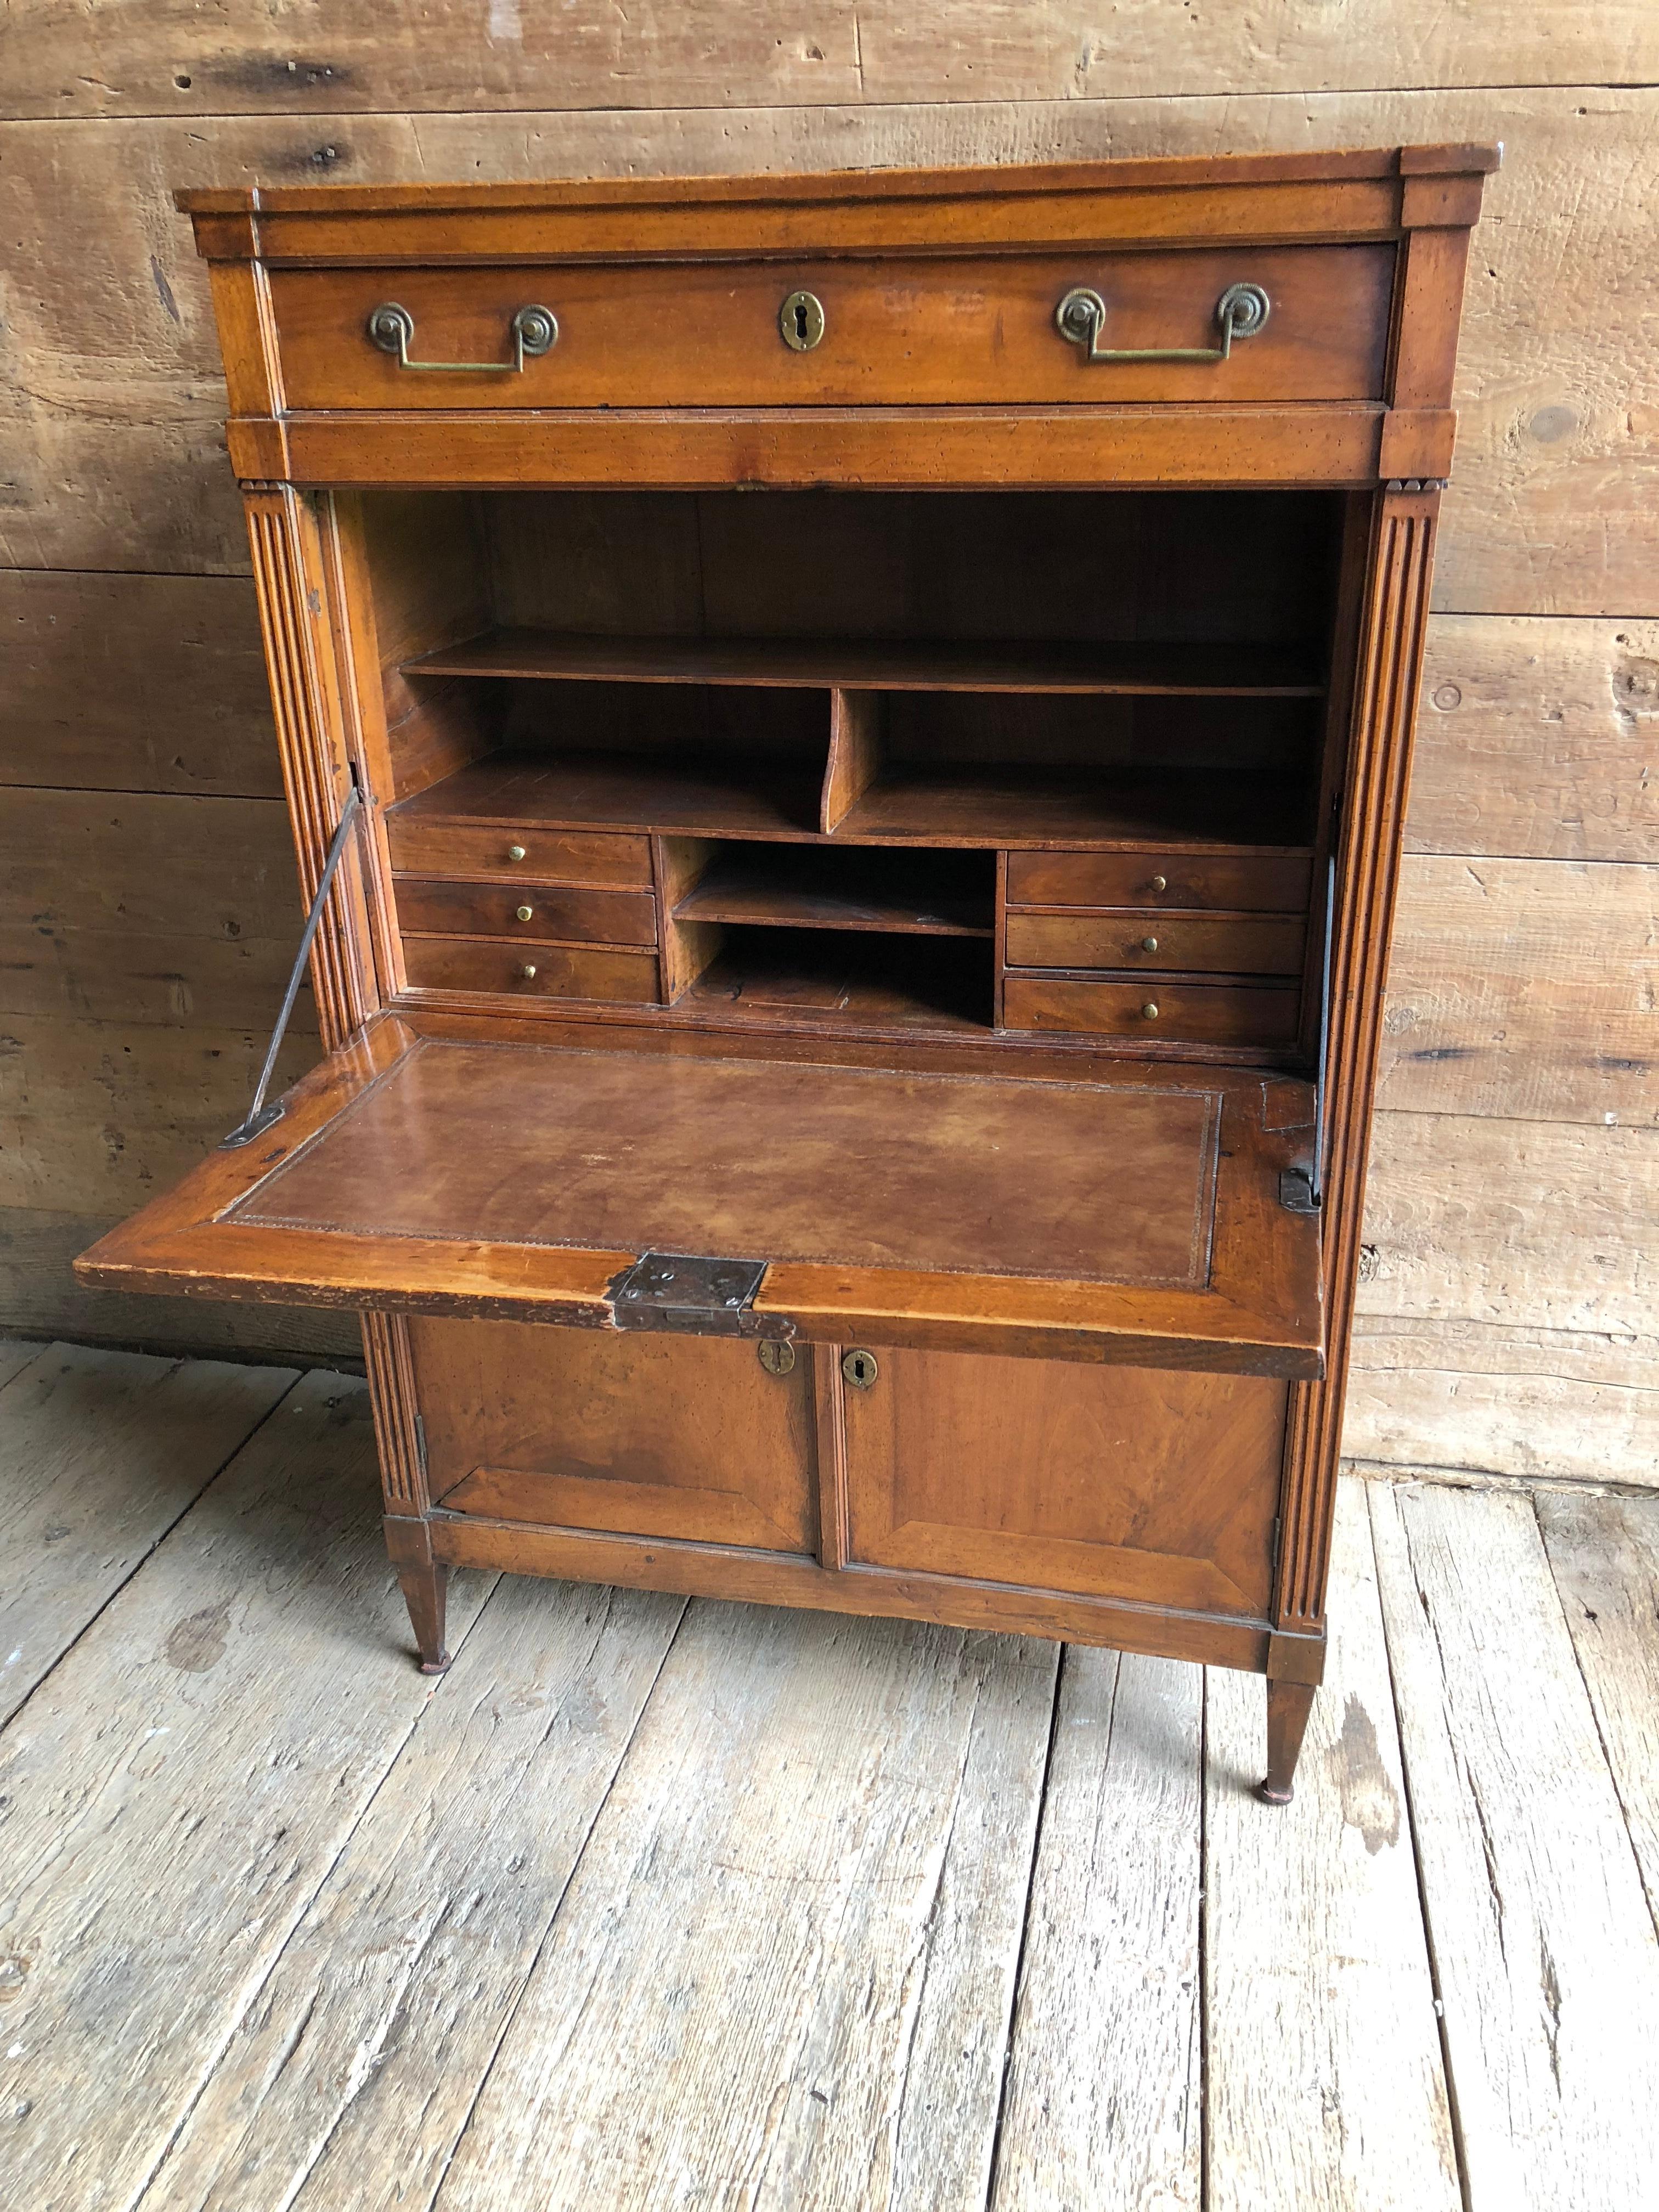 A Provincial fall-front secretaire desk in walnut with original leather writing surface, French Louis XVI, circa 1790. An upper full-length drawer over the fall front compartment over a 2-door lower compartment with shelf and lock box. Original